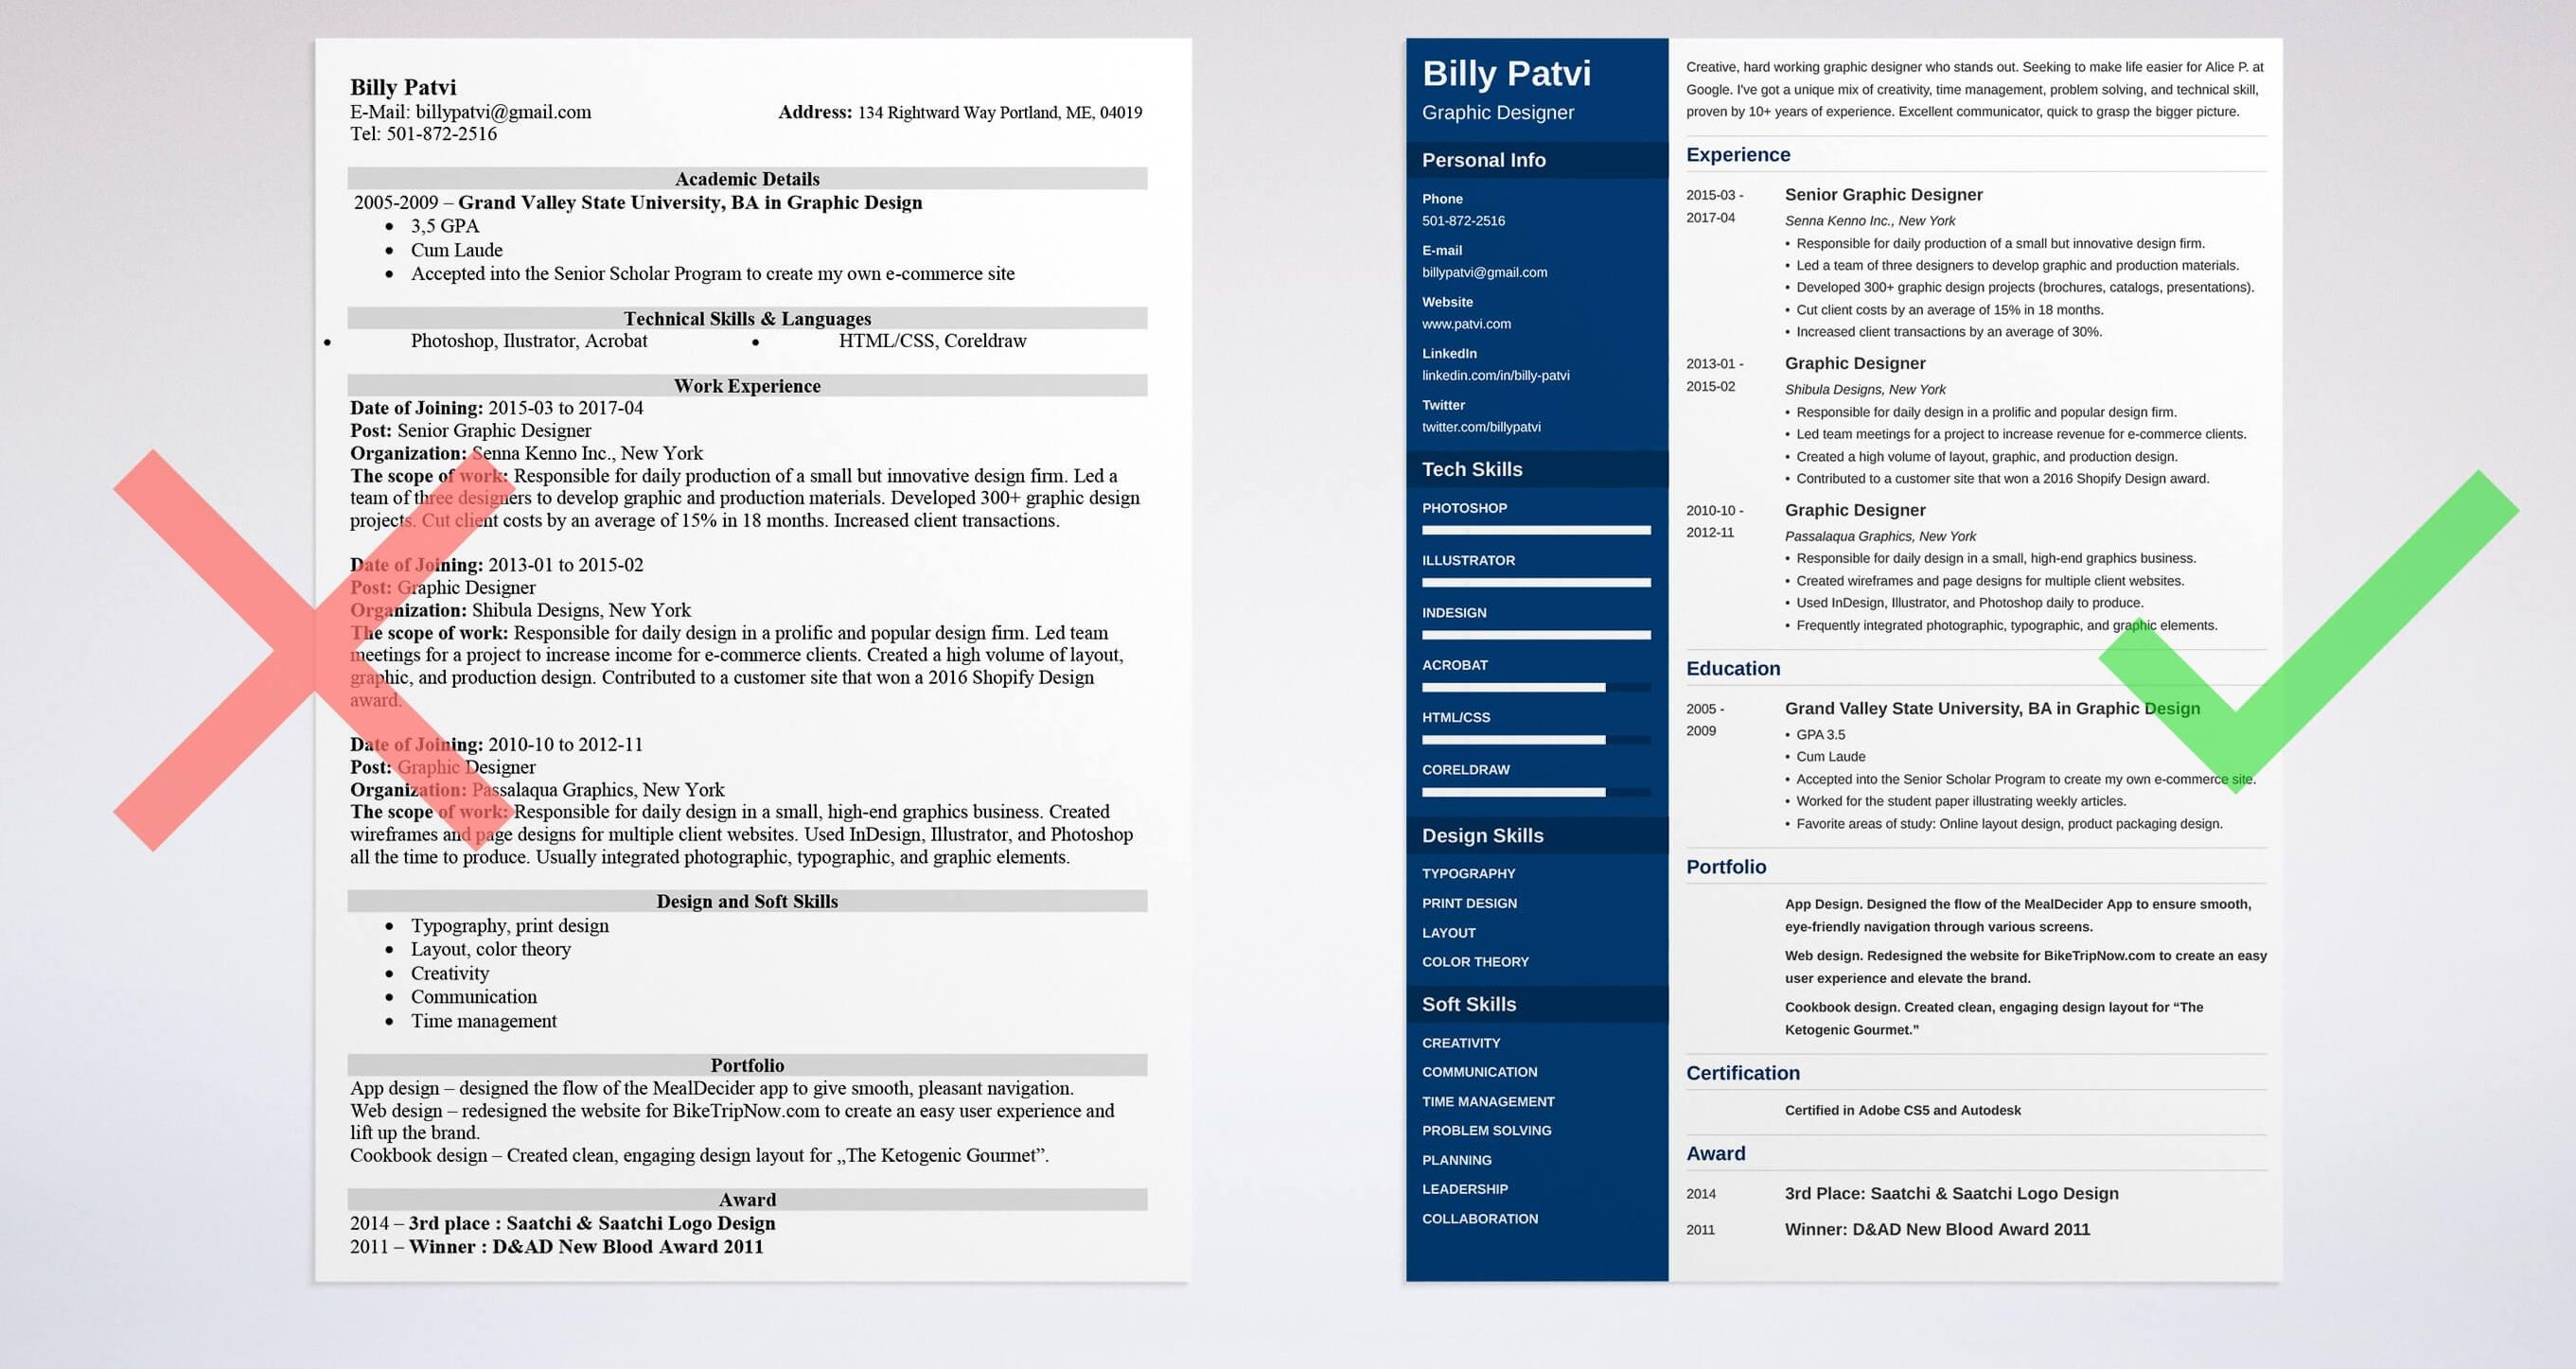 How To Make Online Resume - Fast, Easy and Secure